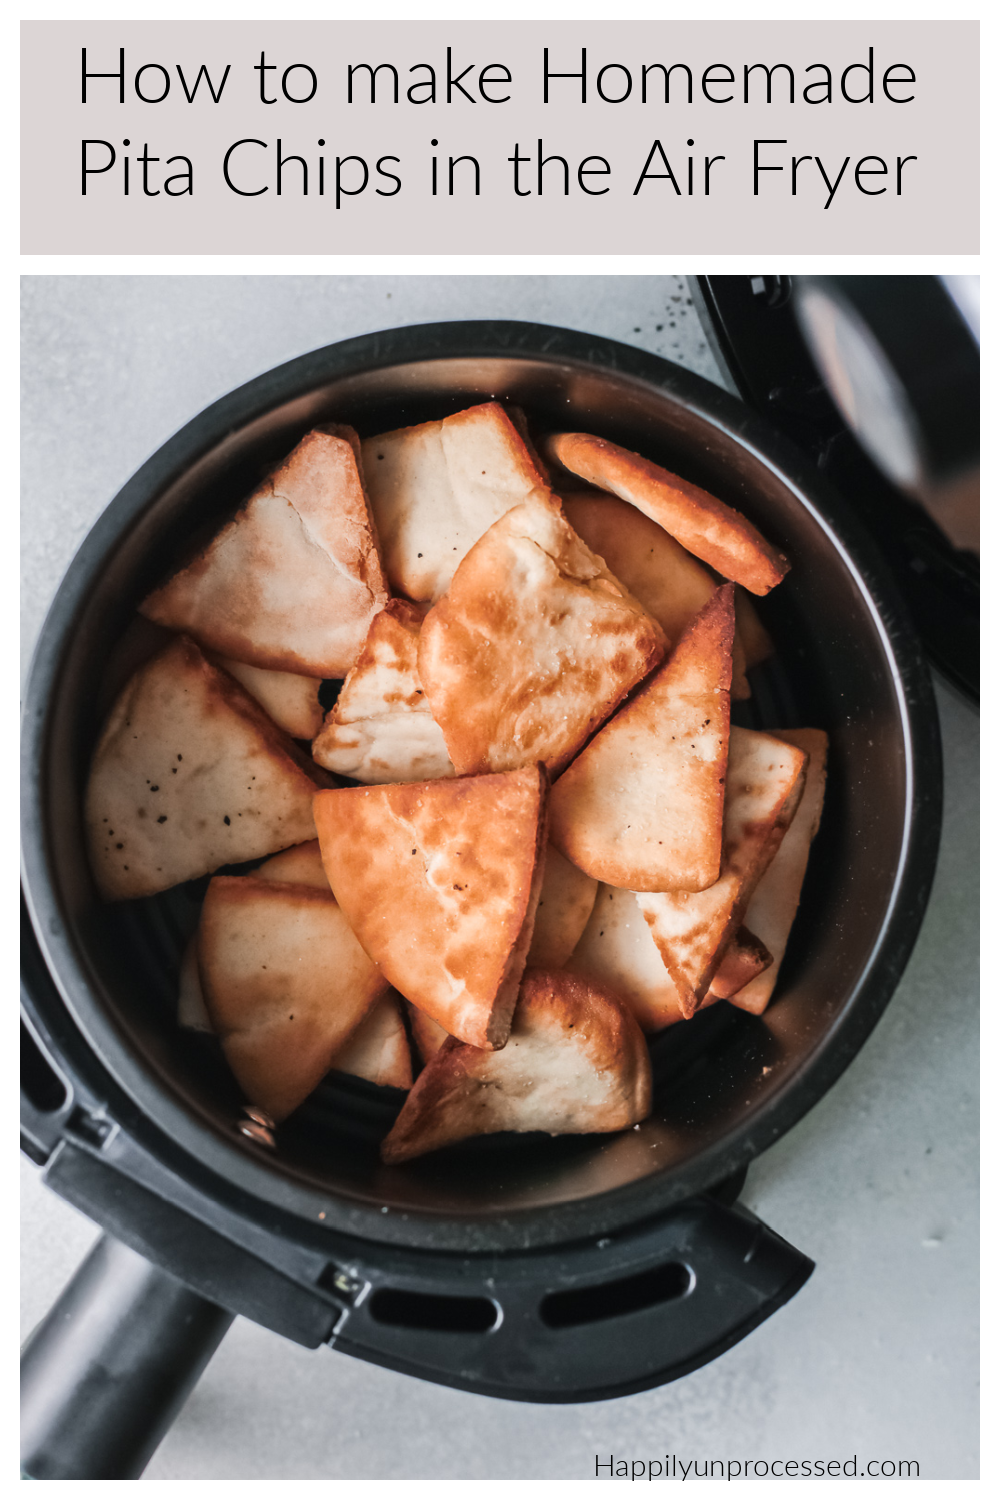 Learn how to make homemade pita chips using an air fryer. Less salt and oil than store bought pita chips - Air Fryer Pita Chips